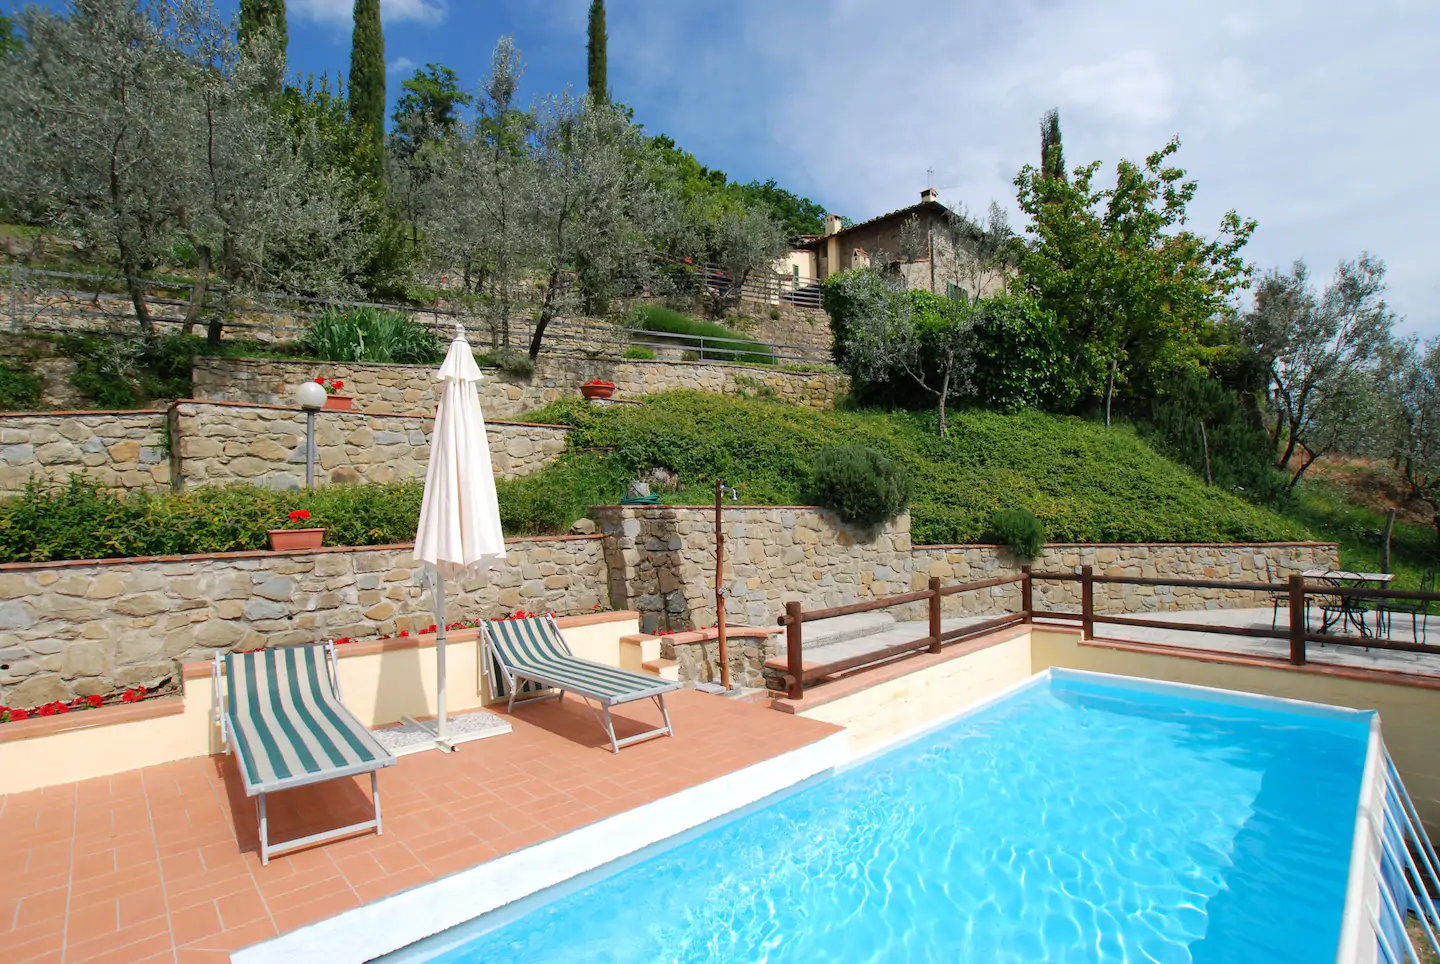 One of the Tuscan villa Airbnbs in Italy with a pool